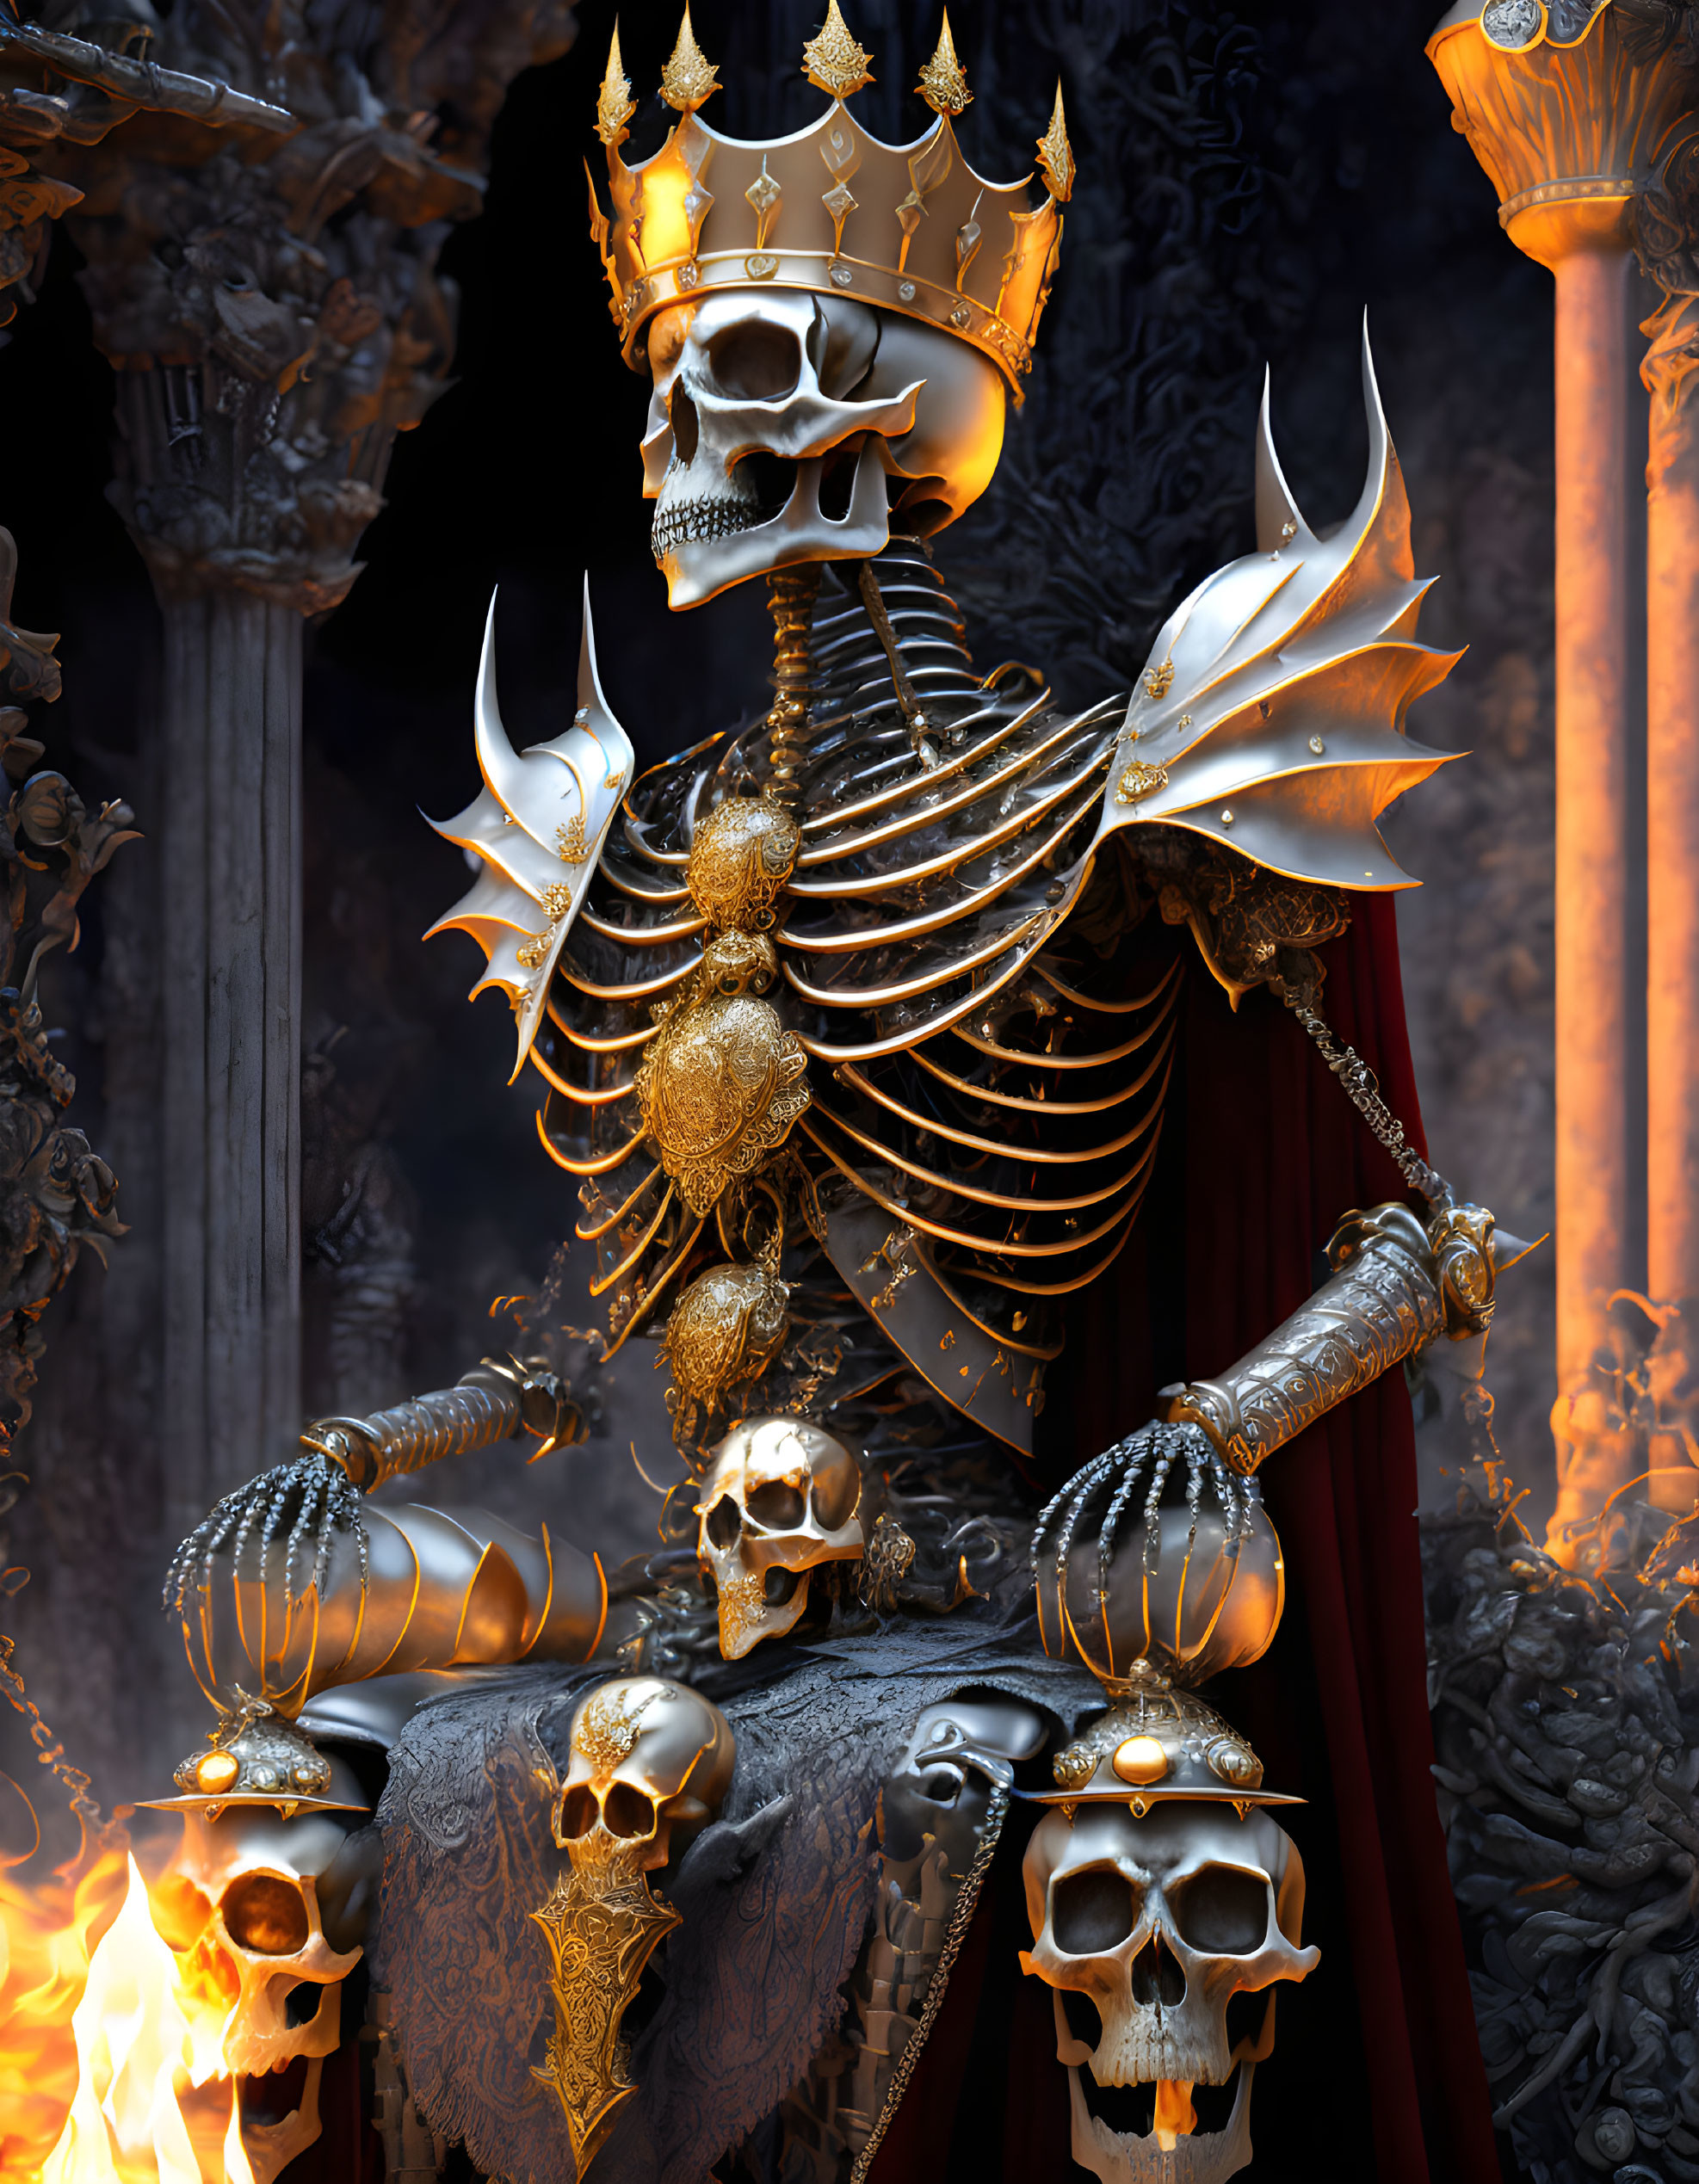 Detailed Ornate Skeleton Throne with Crown and Flames